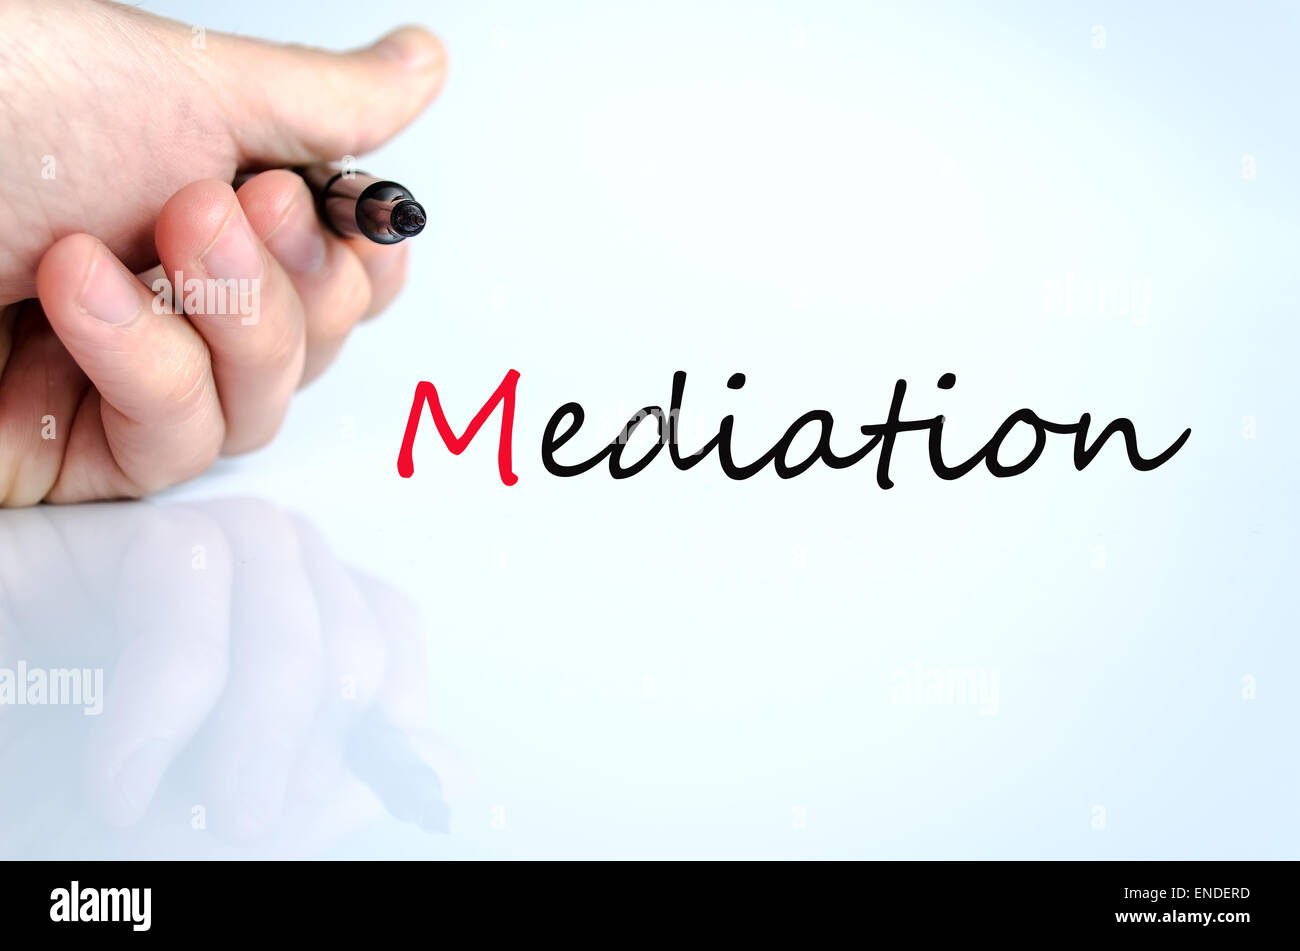 Pen in the hand isolated over white background mediation concept Stock Photo